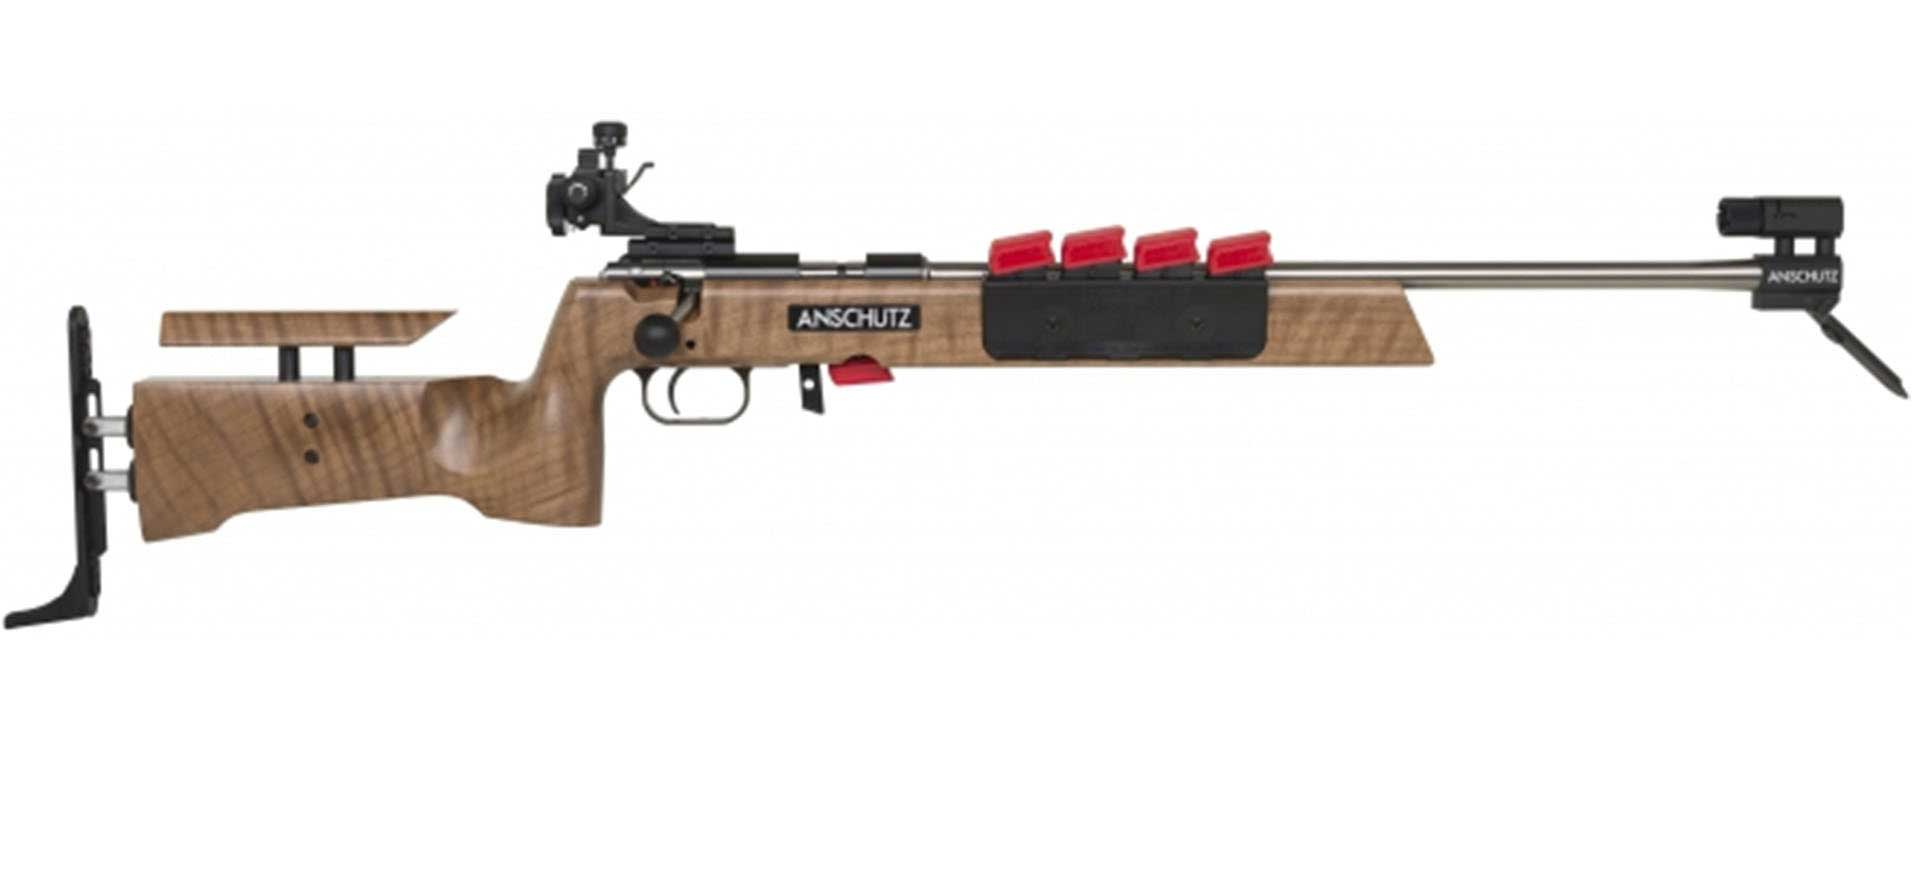 A brown and red Anshutz rimfire rifle on a white background.